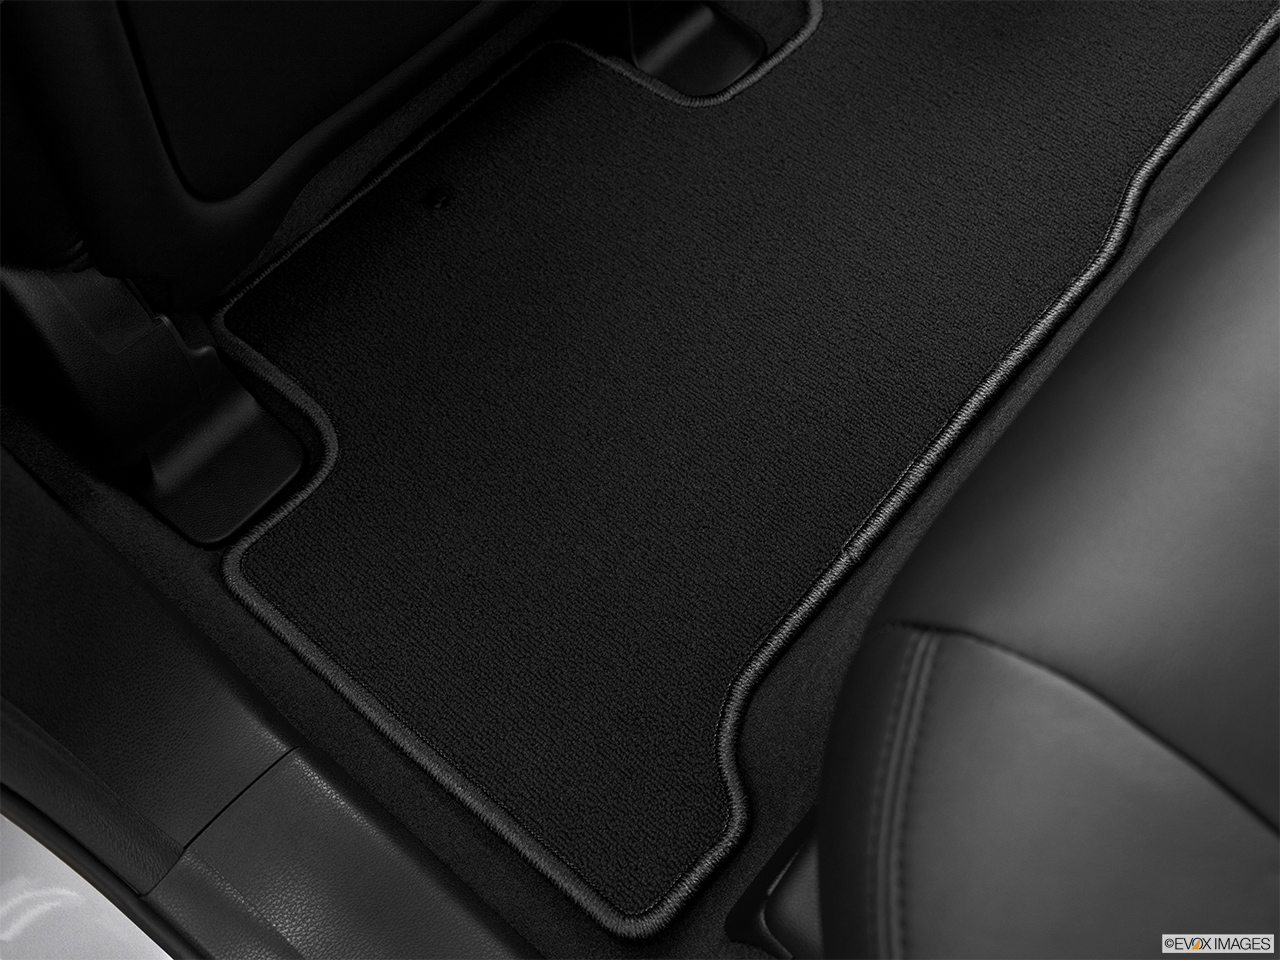 2013 Acura MDX Base Rear driver's side floor mat. Mid-seat level from outside looking in. 